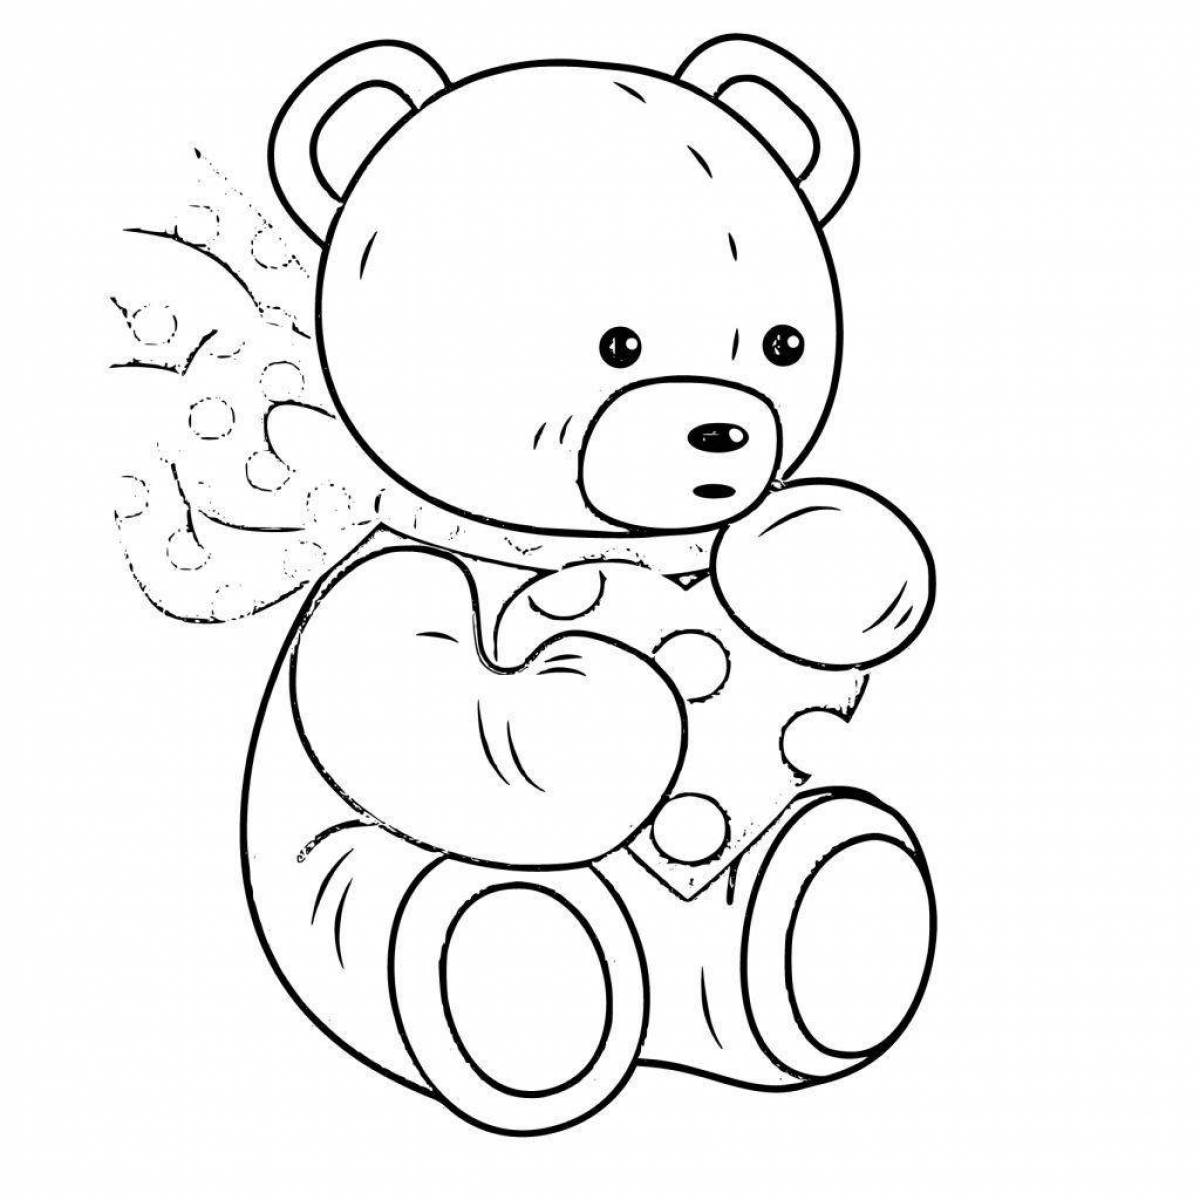 Coloring book playful teddy bear in baby pants